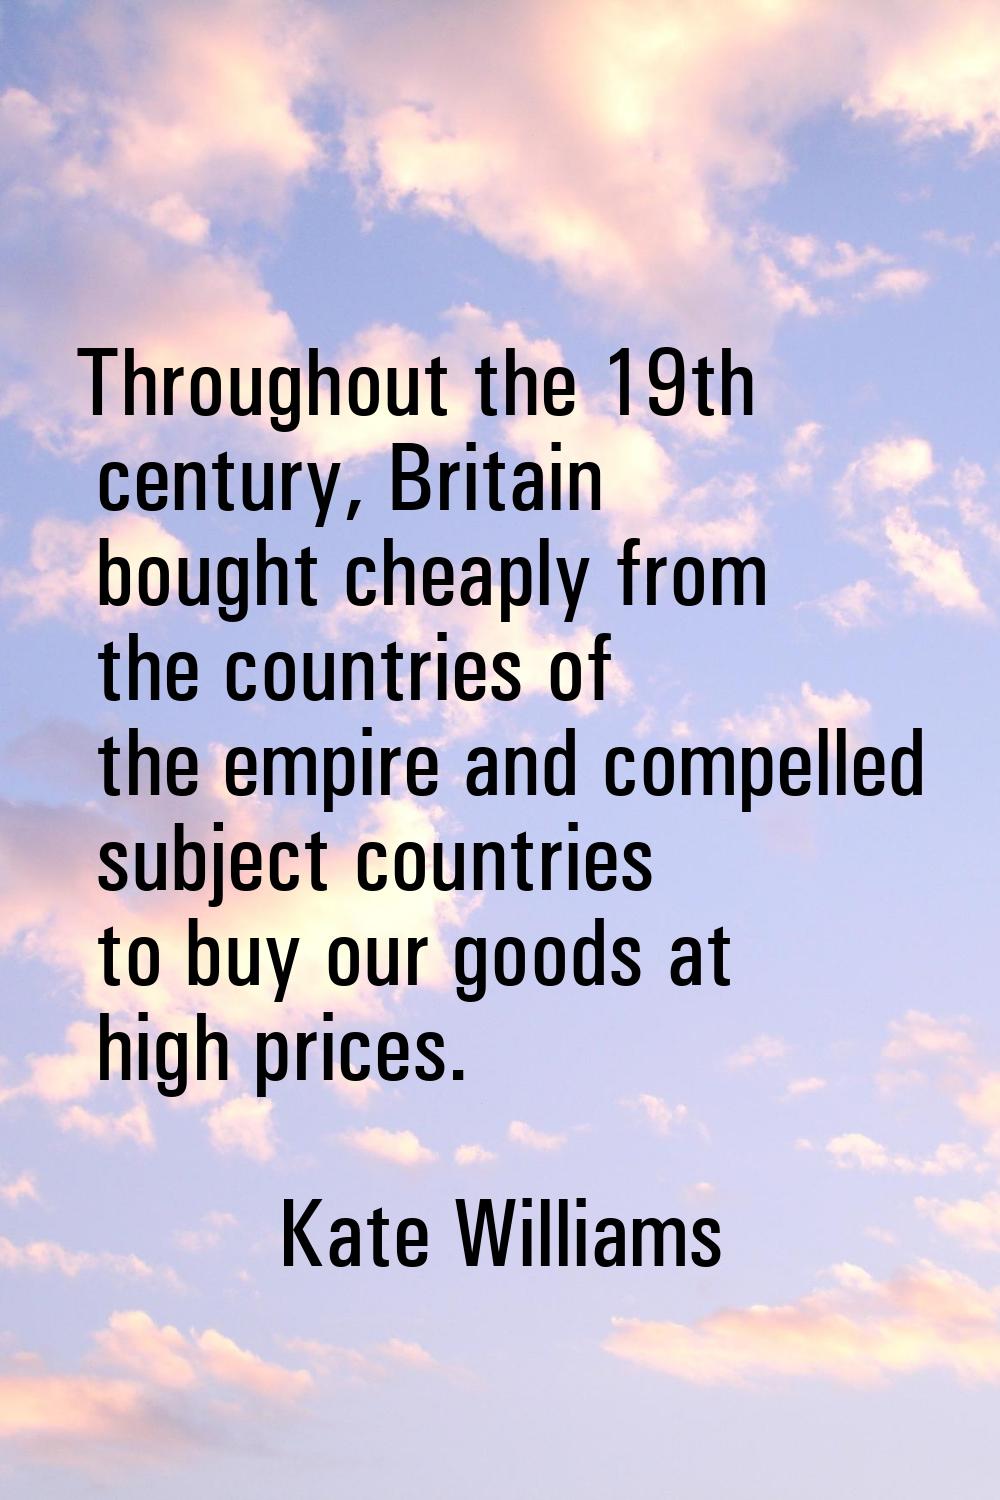 Throughout the 19th century, Britain bought cheaply from the countries of the empire and compelled 